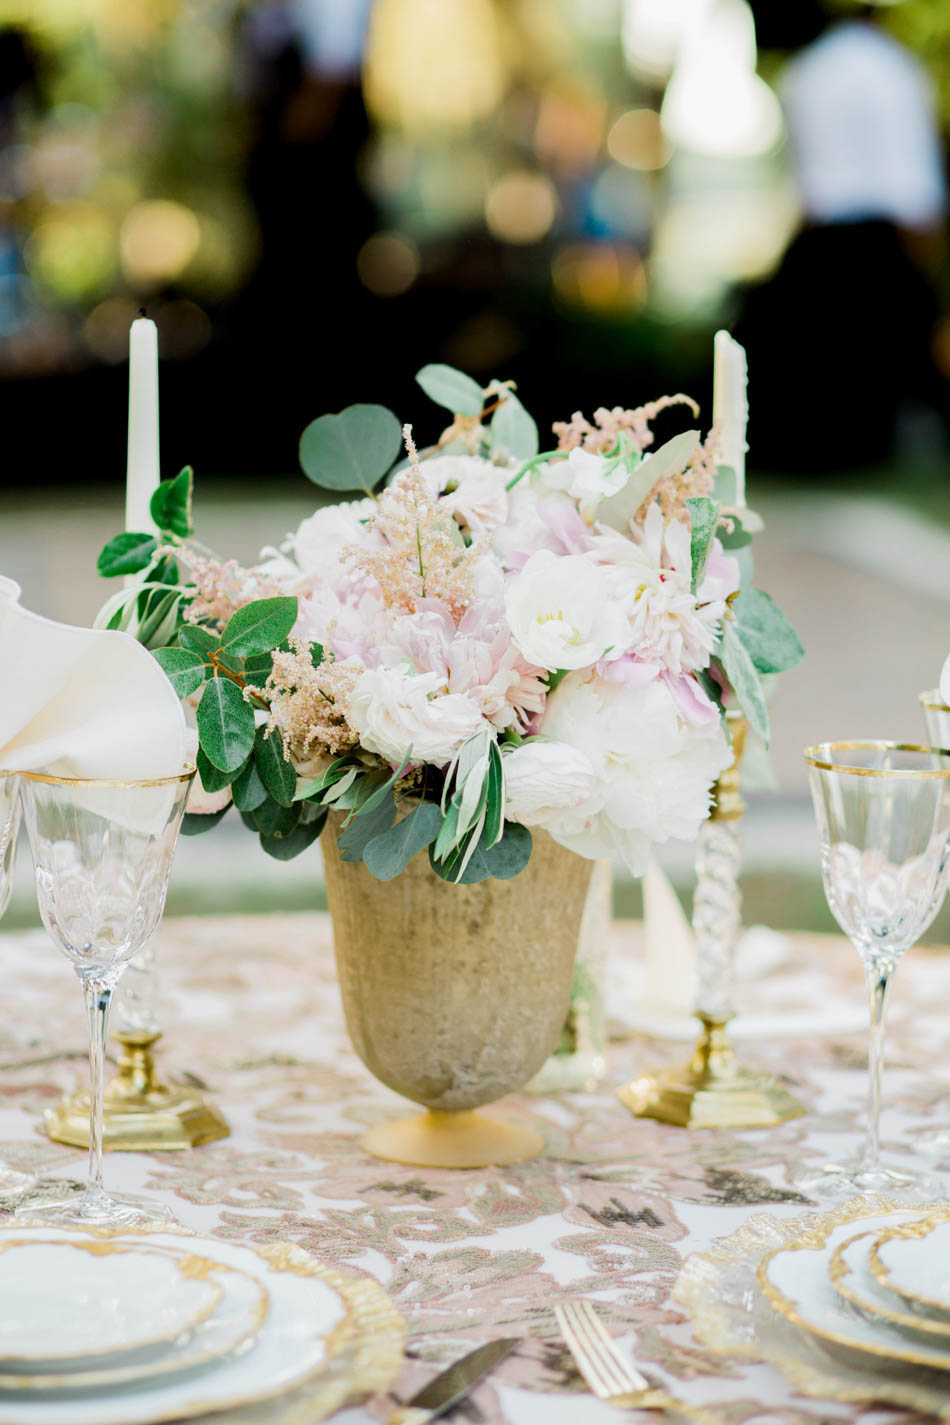 Beautiful flowers of pink, white and green are the centerpieces, Wadmalaw Island, South Carolina Kate Timbers Photography. http://katetimbers.com #katetimbersphotography // Charleston Photography // Inspiration